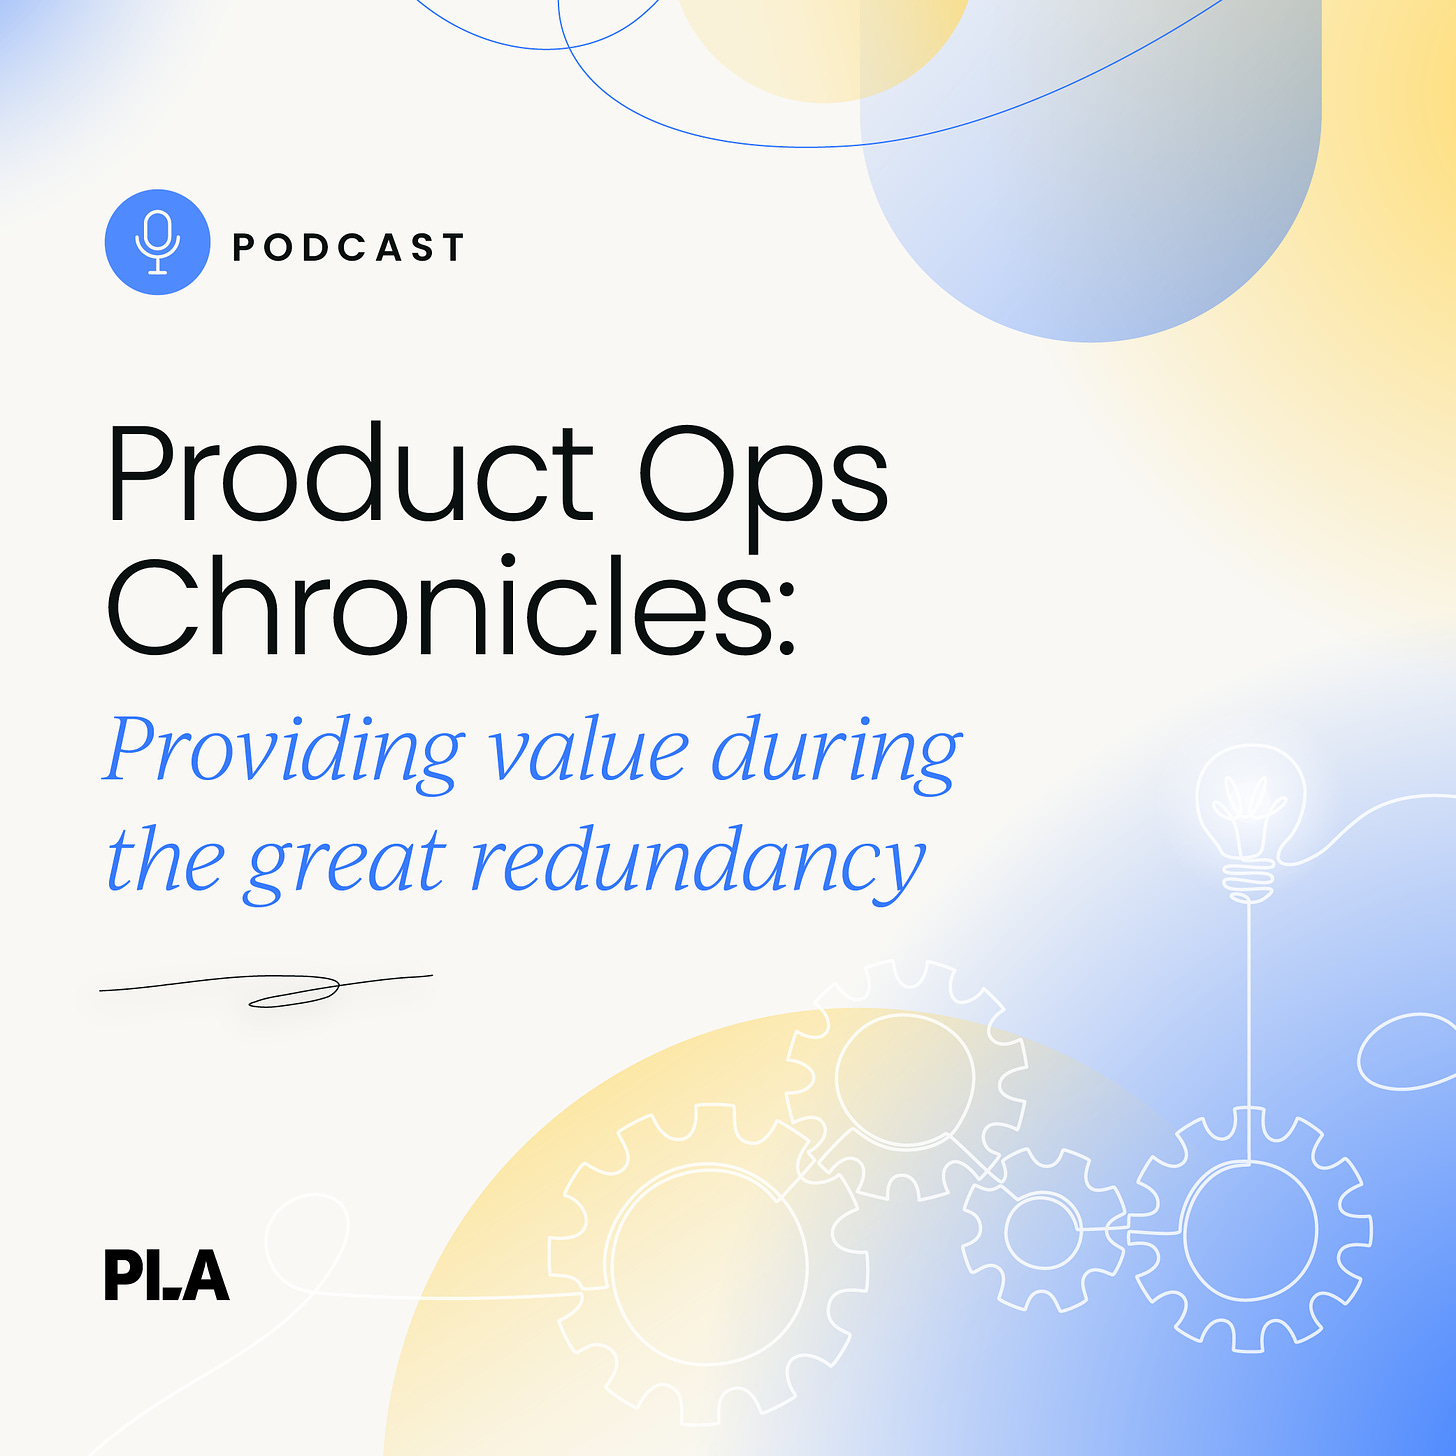 Product Ops Chronicles: Providing value during the great redundancy